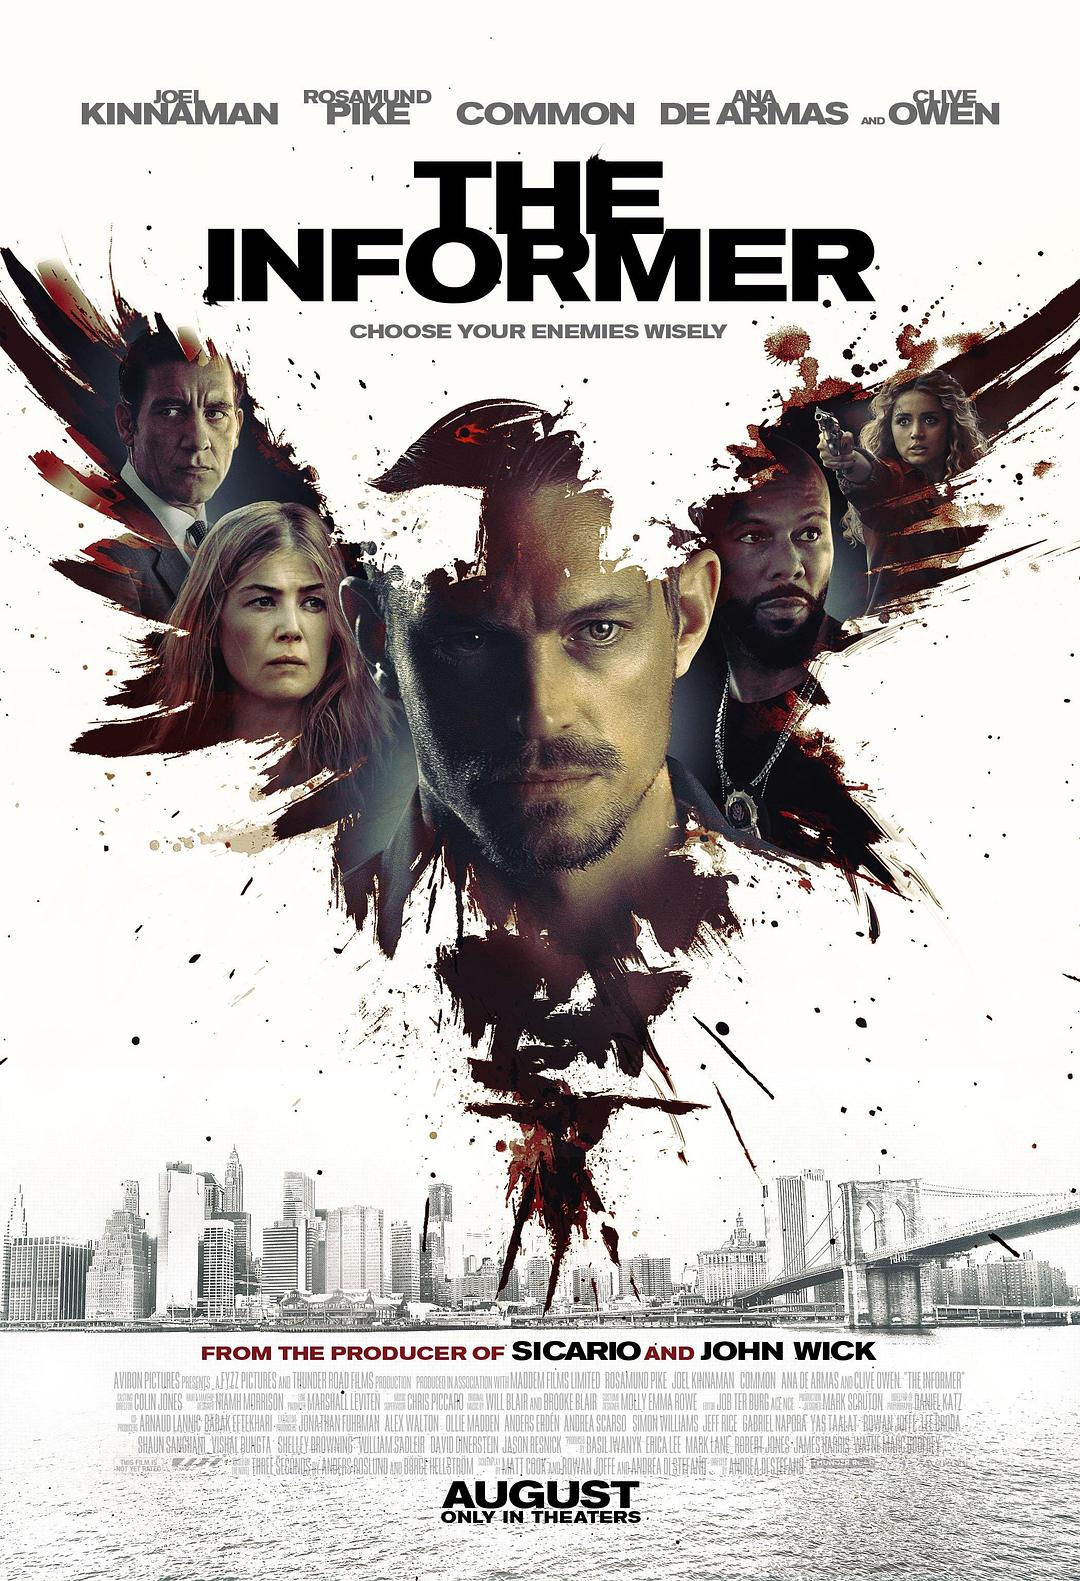  The.Informer.2019.1080p.BluRay.x264-AMIABLE 8.74GB-1.png